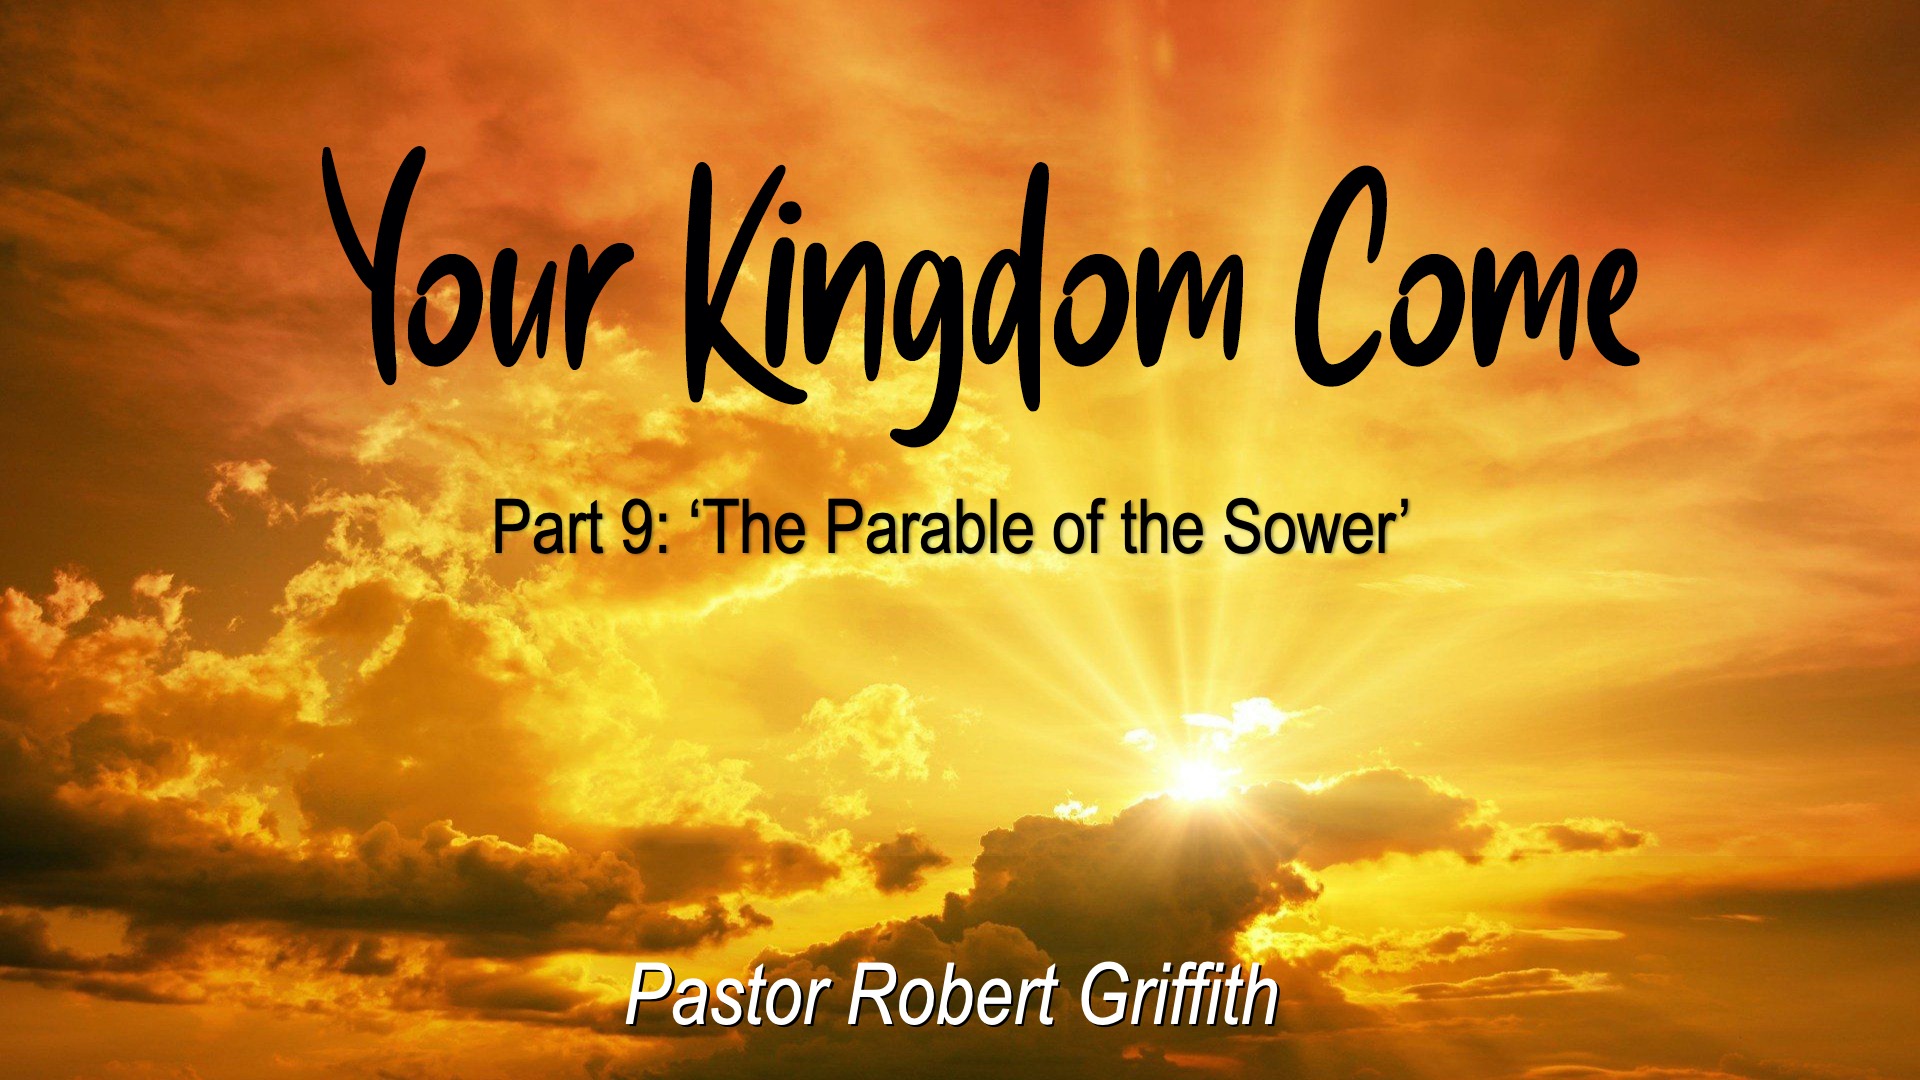 Your Kingdom Come (9)‘Parable of the Sower’